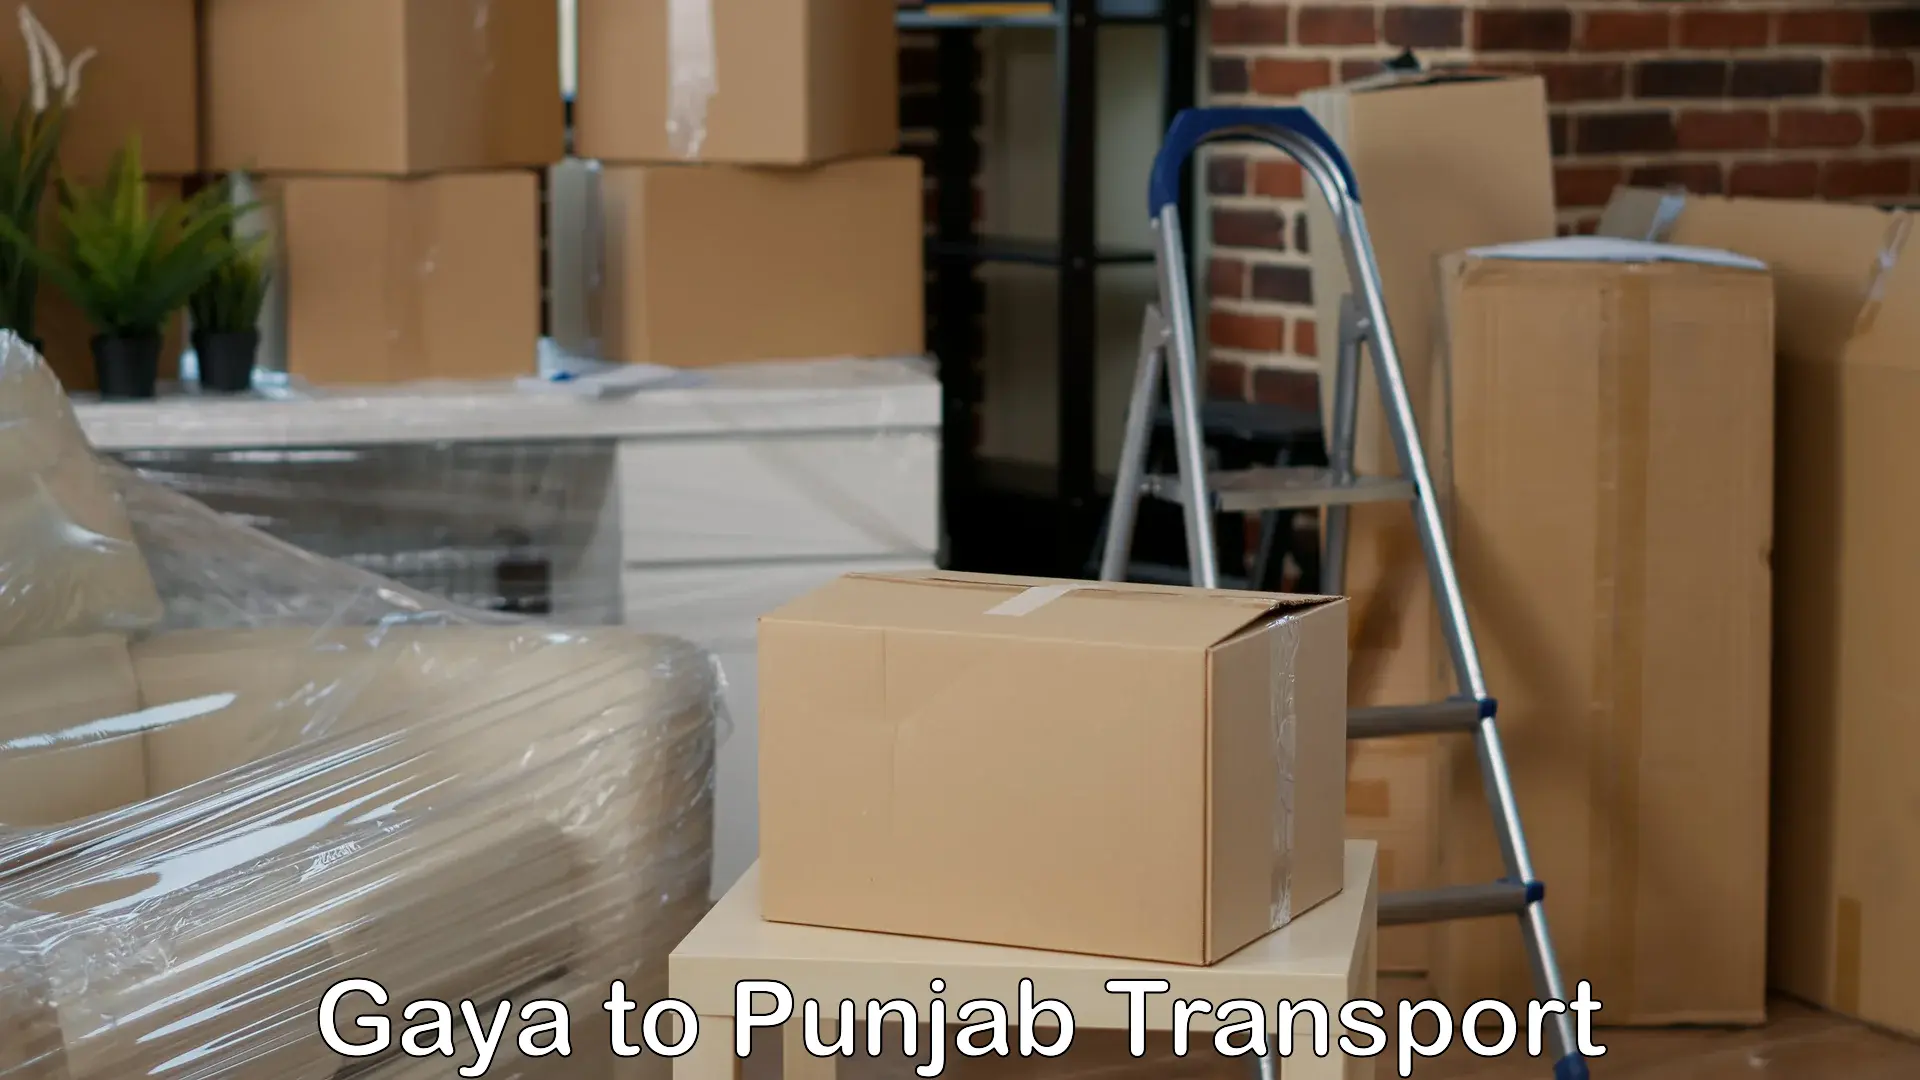 Express transport services Gaya to Sultanpur Lodhi